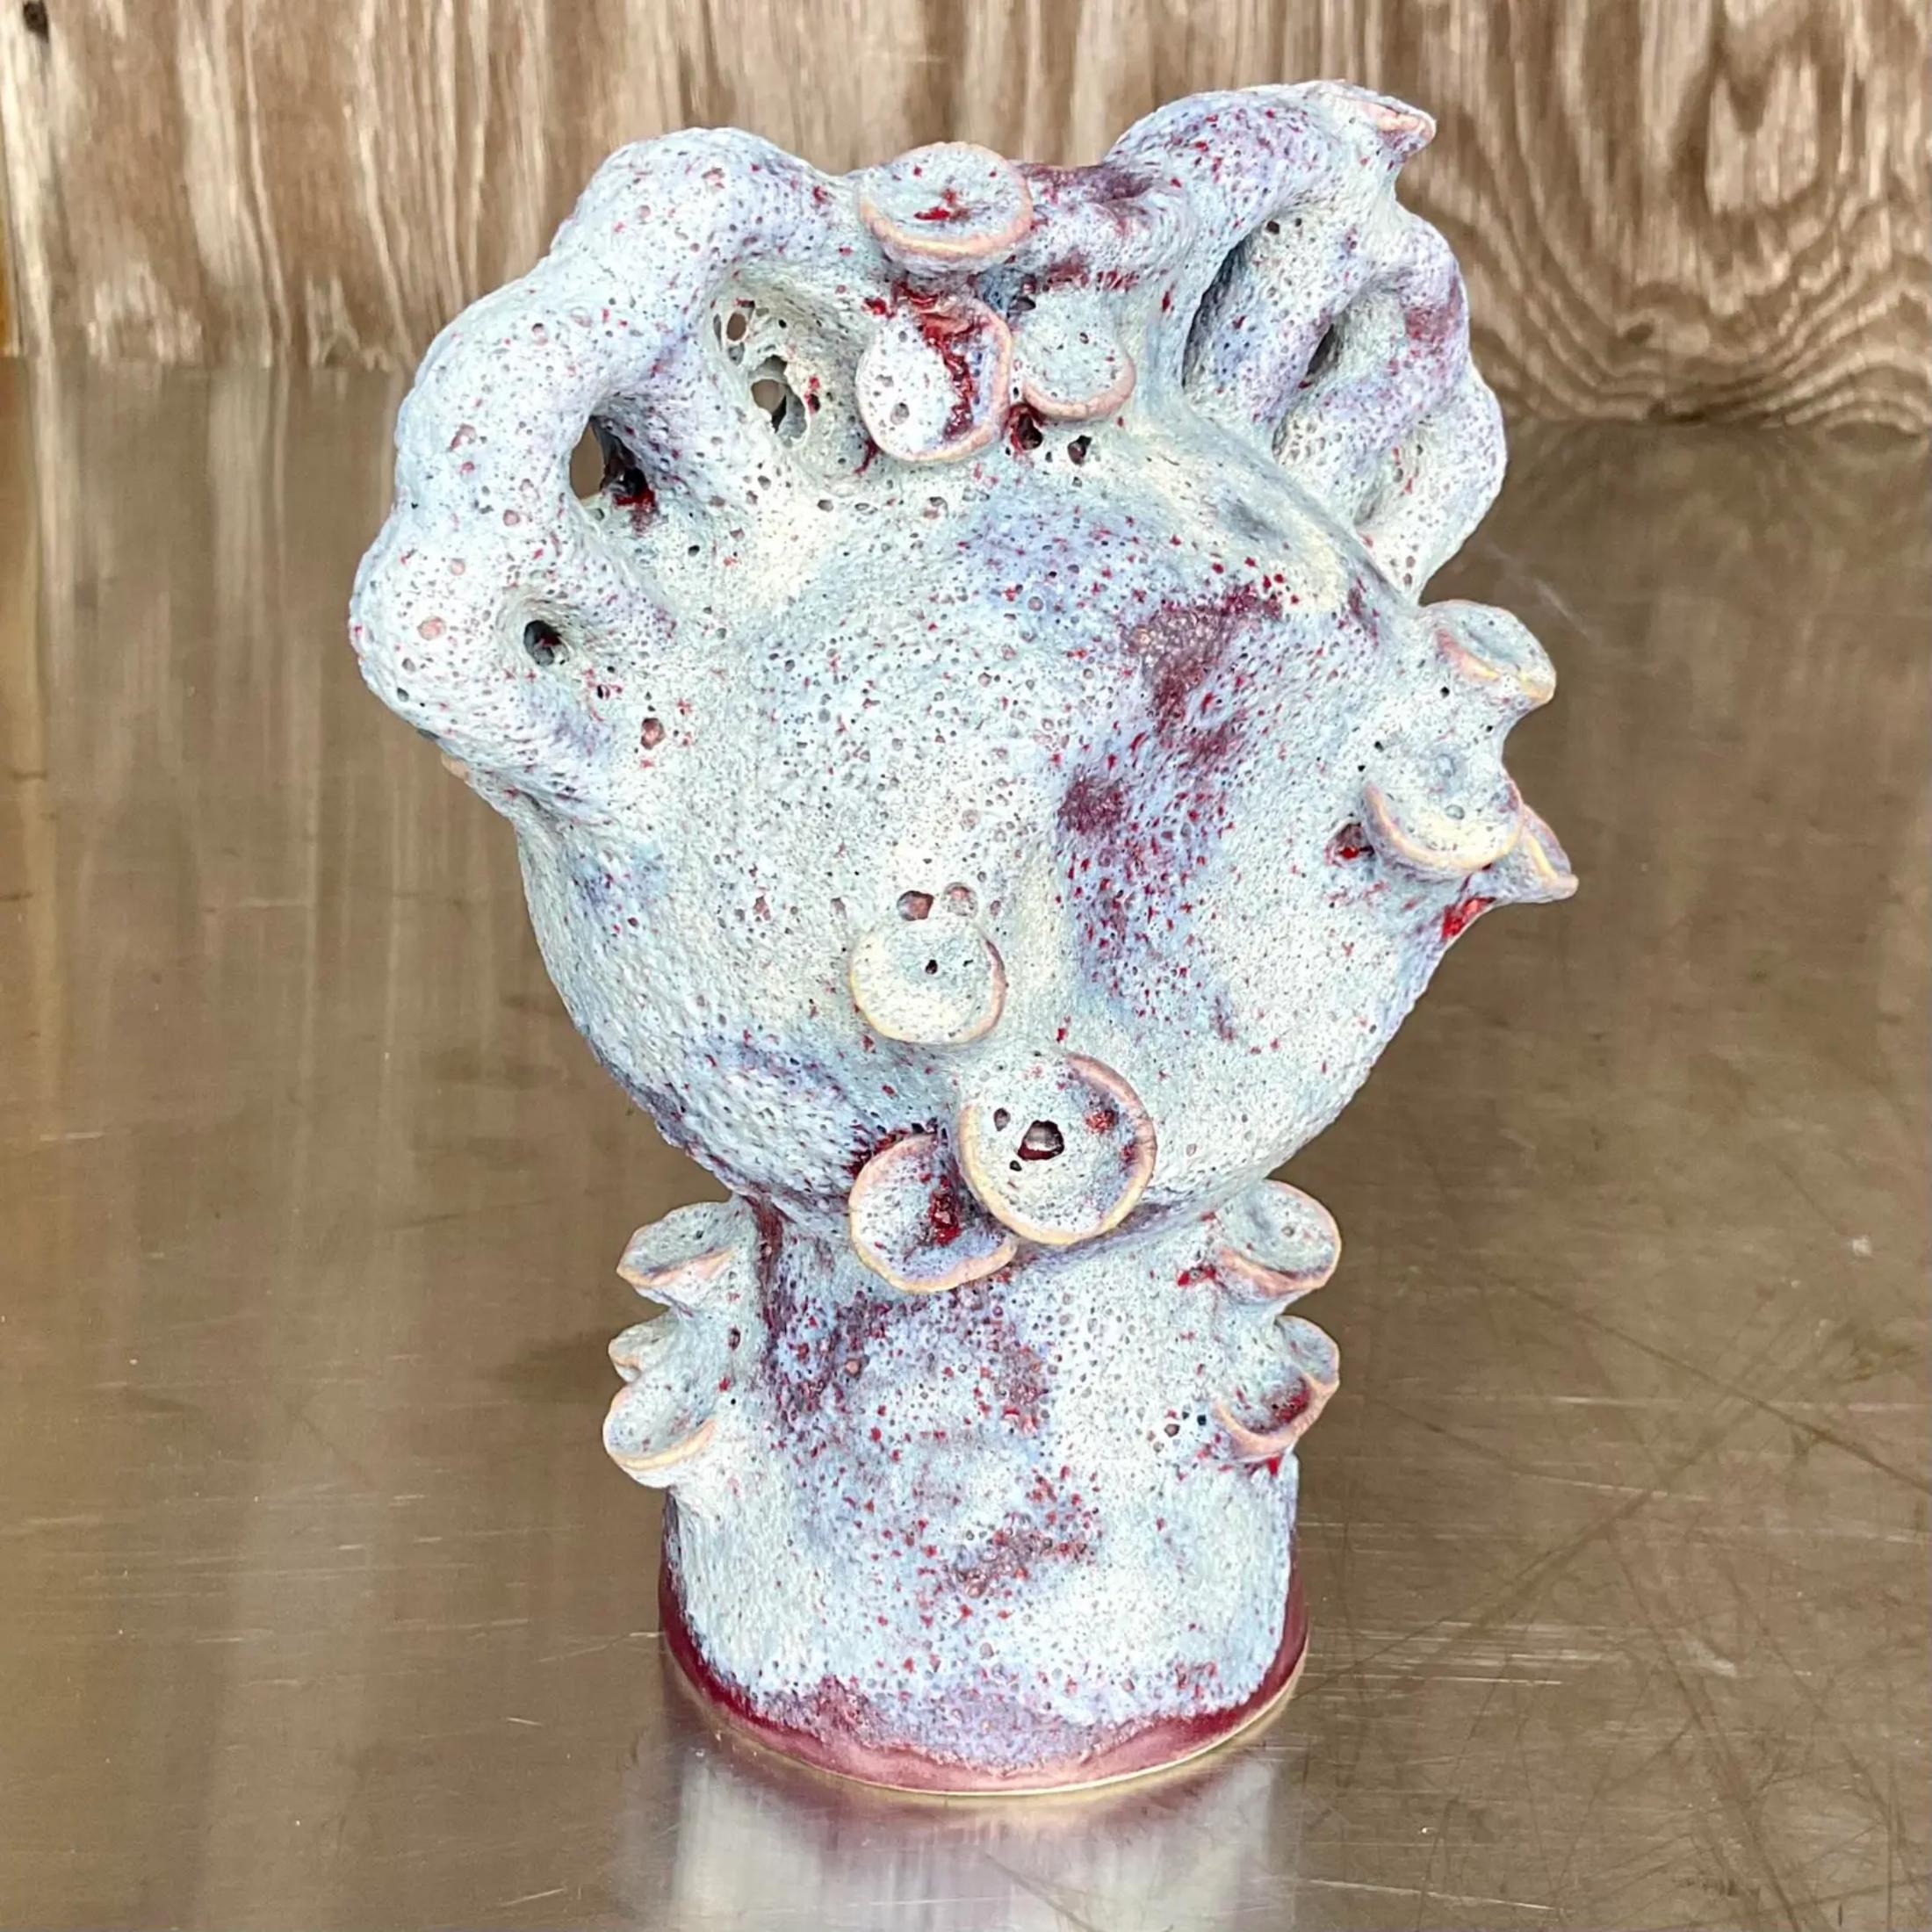 Fantastic vintage Boho Lave glazed sculpture. Hand crafted studio pottery in an abstract design. Gorgeous display of color peeking from below the glaze. Acquired from a Palm Beach estate